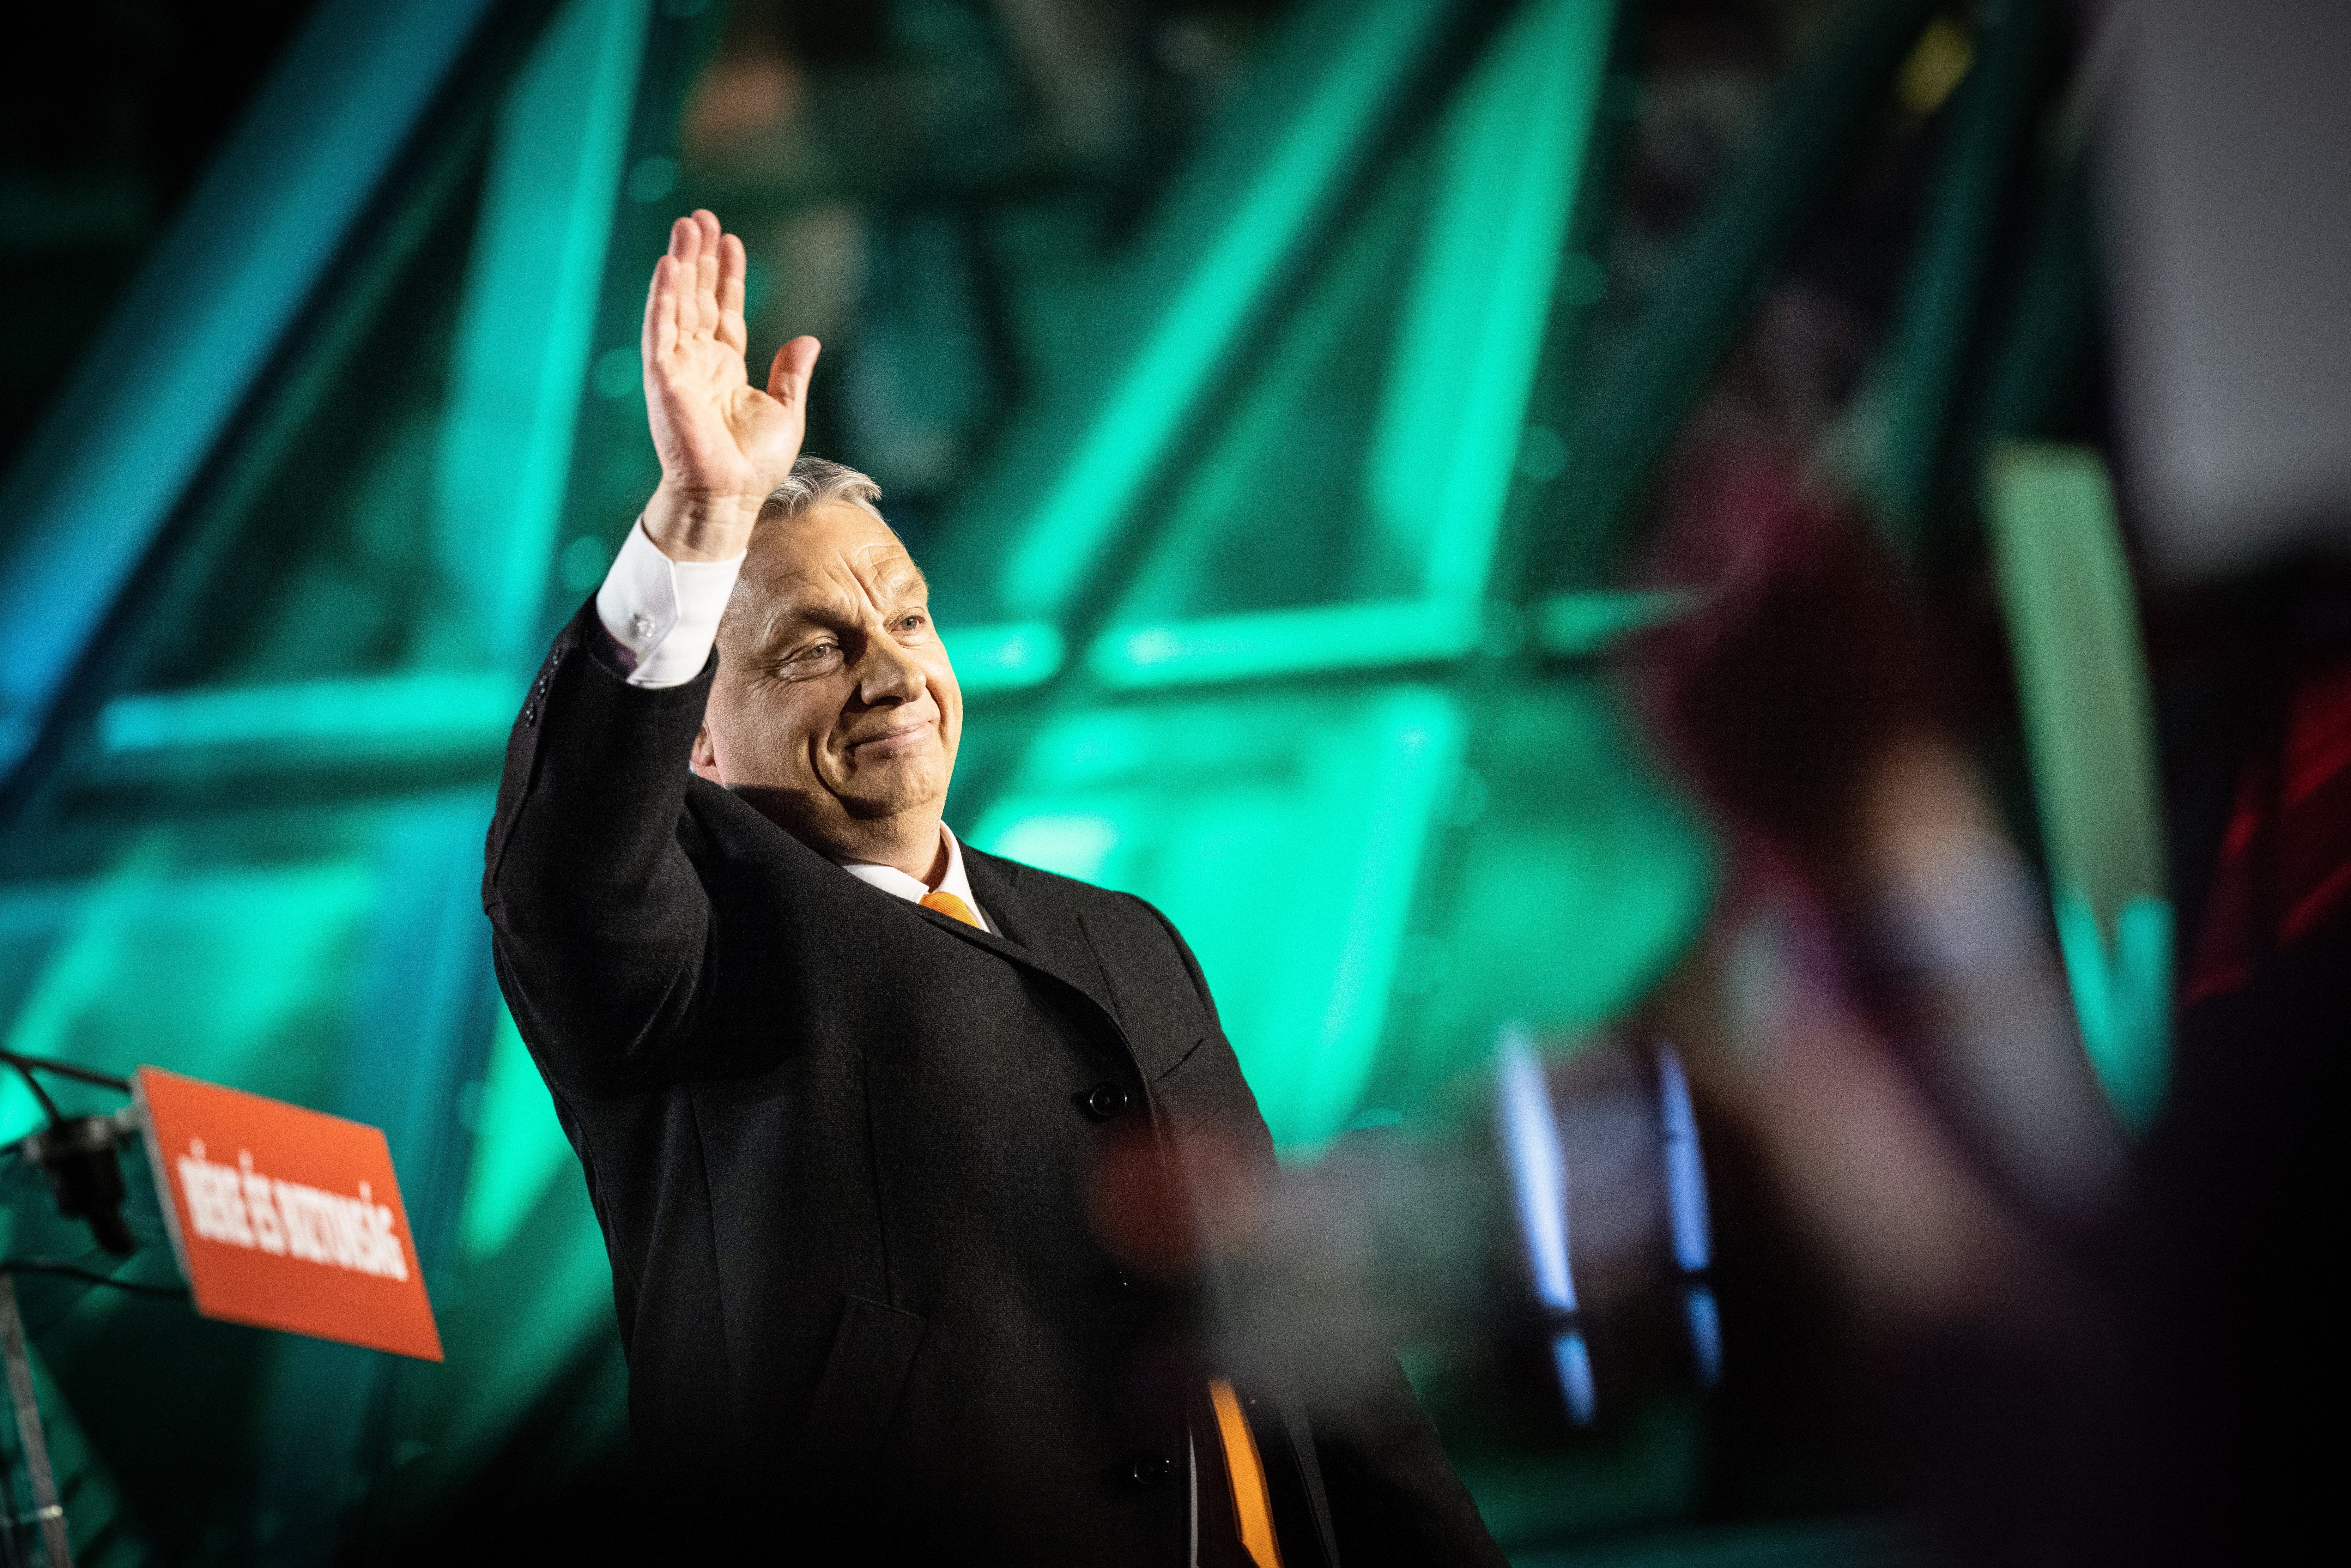 Hungarian prime minister Viktor Orban waves to his supporters during the governing Fidesz-KDNP party’s event after the general election